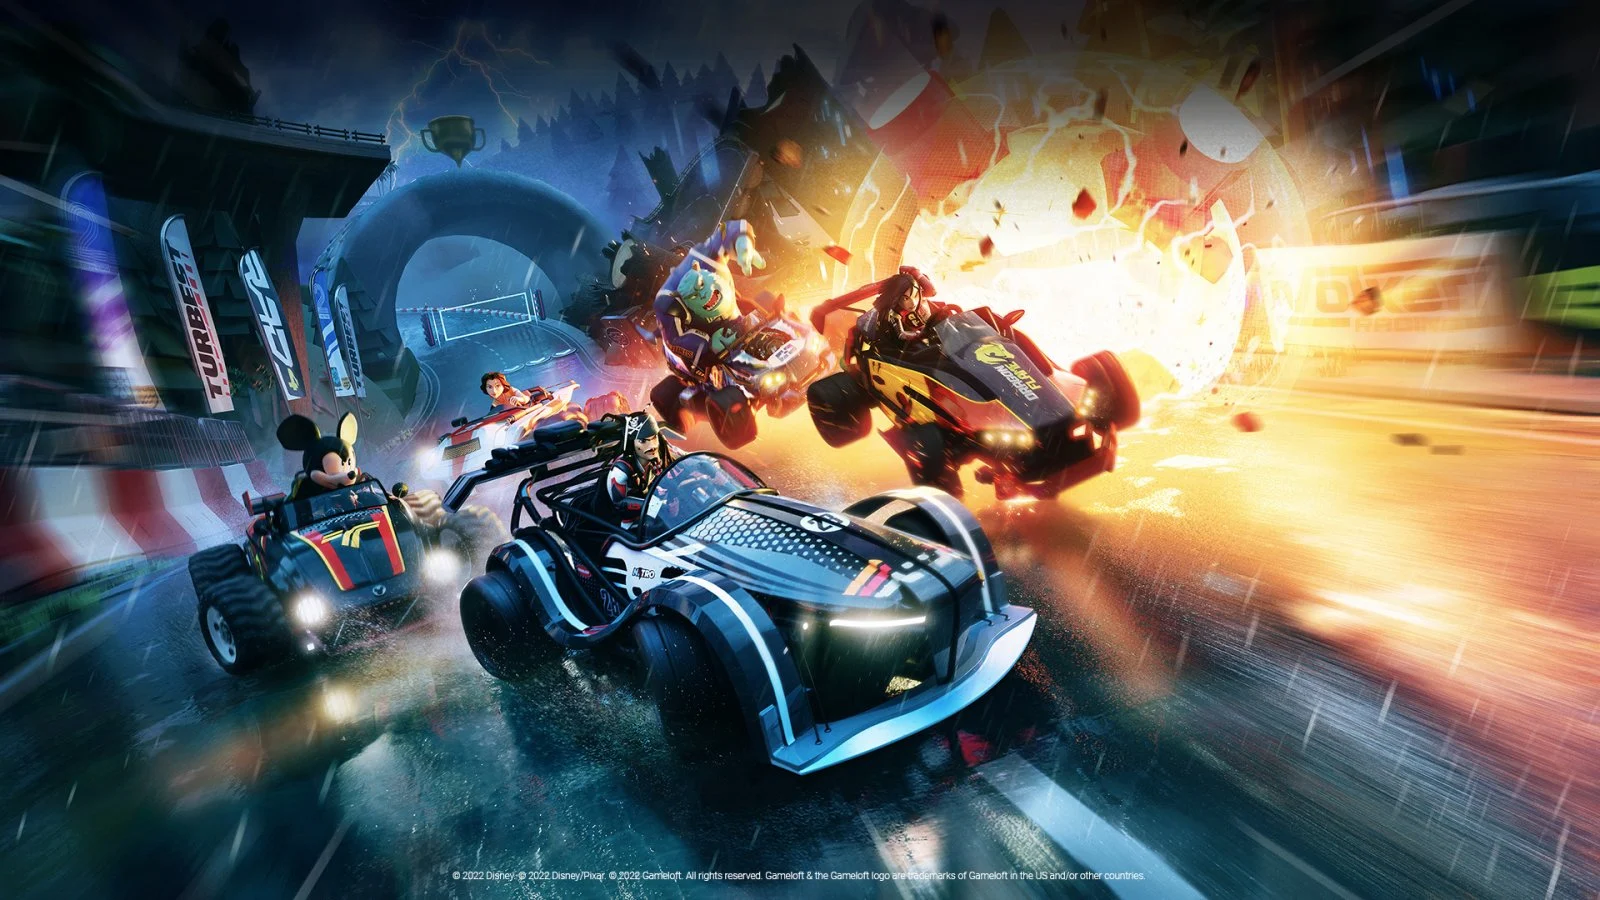 Disney Speedstorm Hits Early Access on Xbox Today with Fully